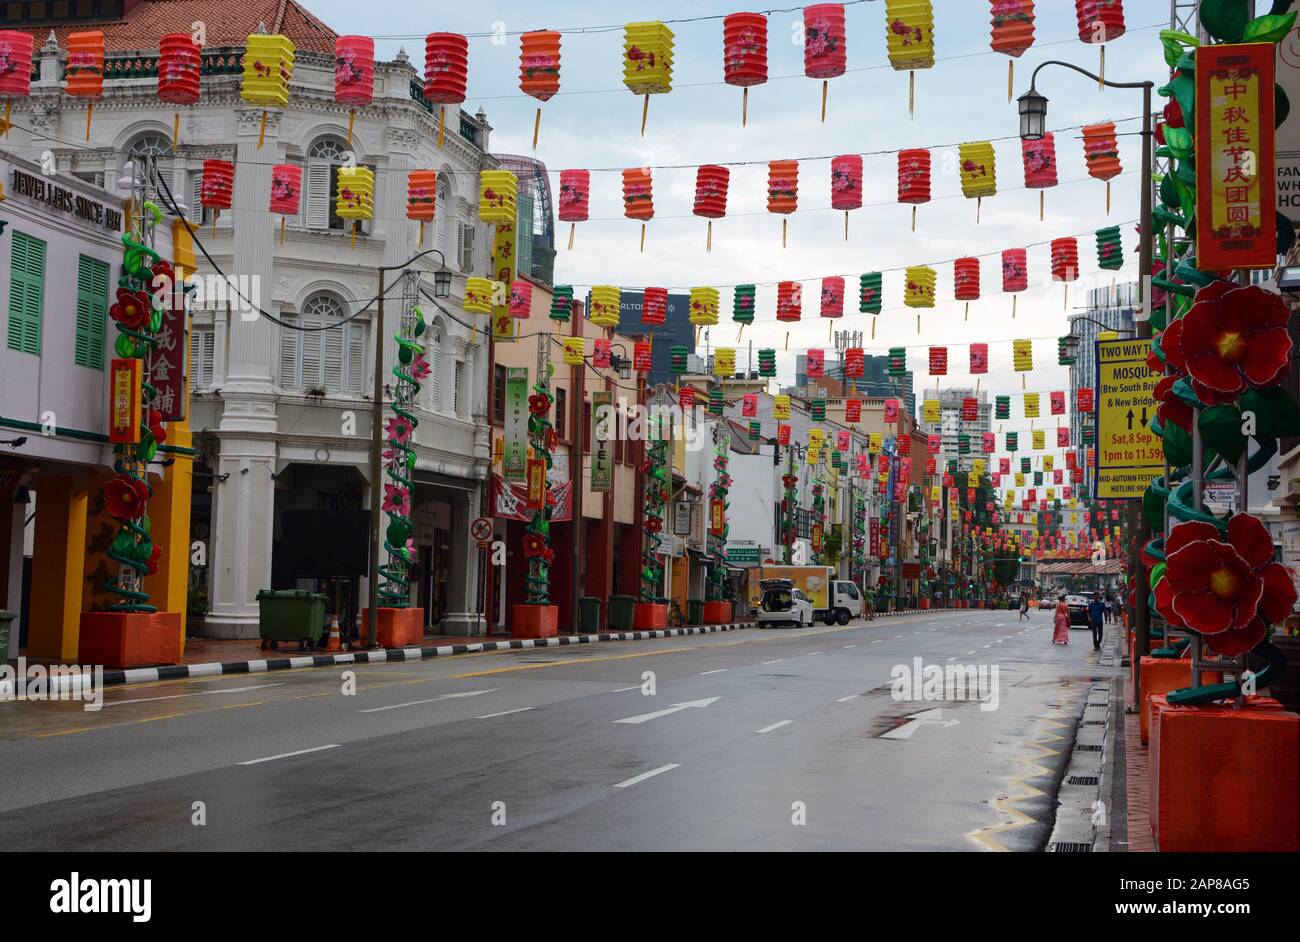 Singapore - September 10, 2018: View of South Bridge Road in Singapore's Chinatown Stock Photo